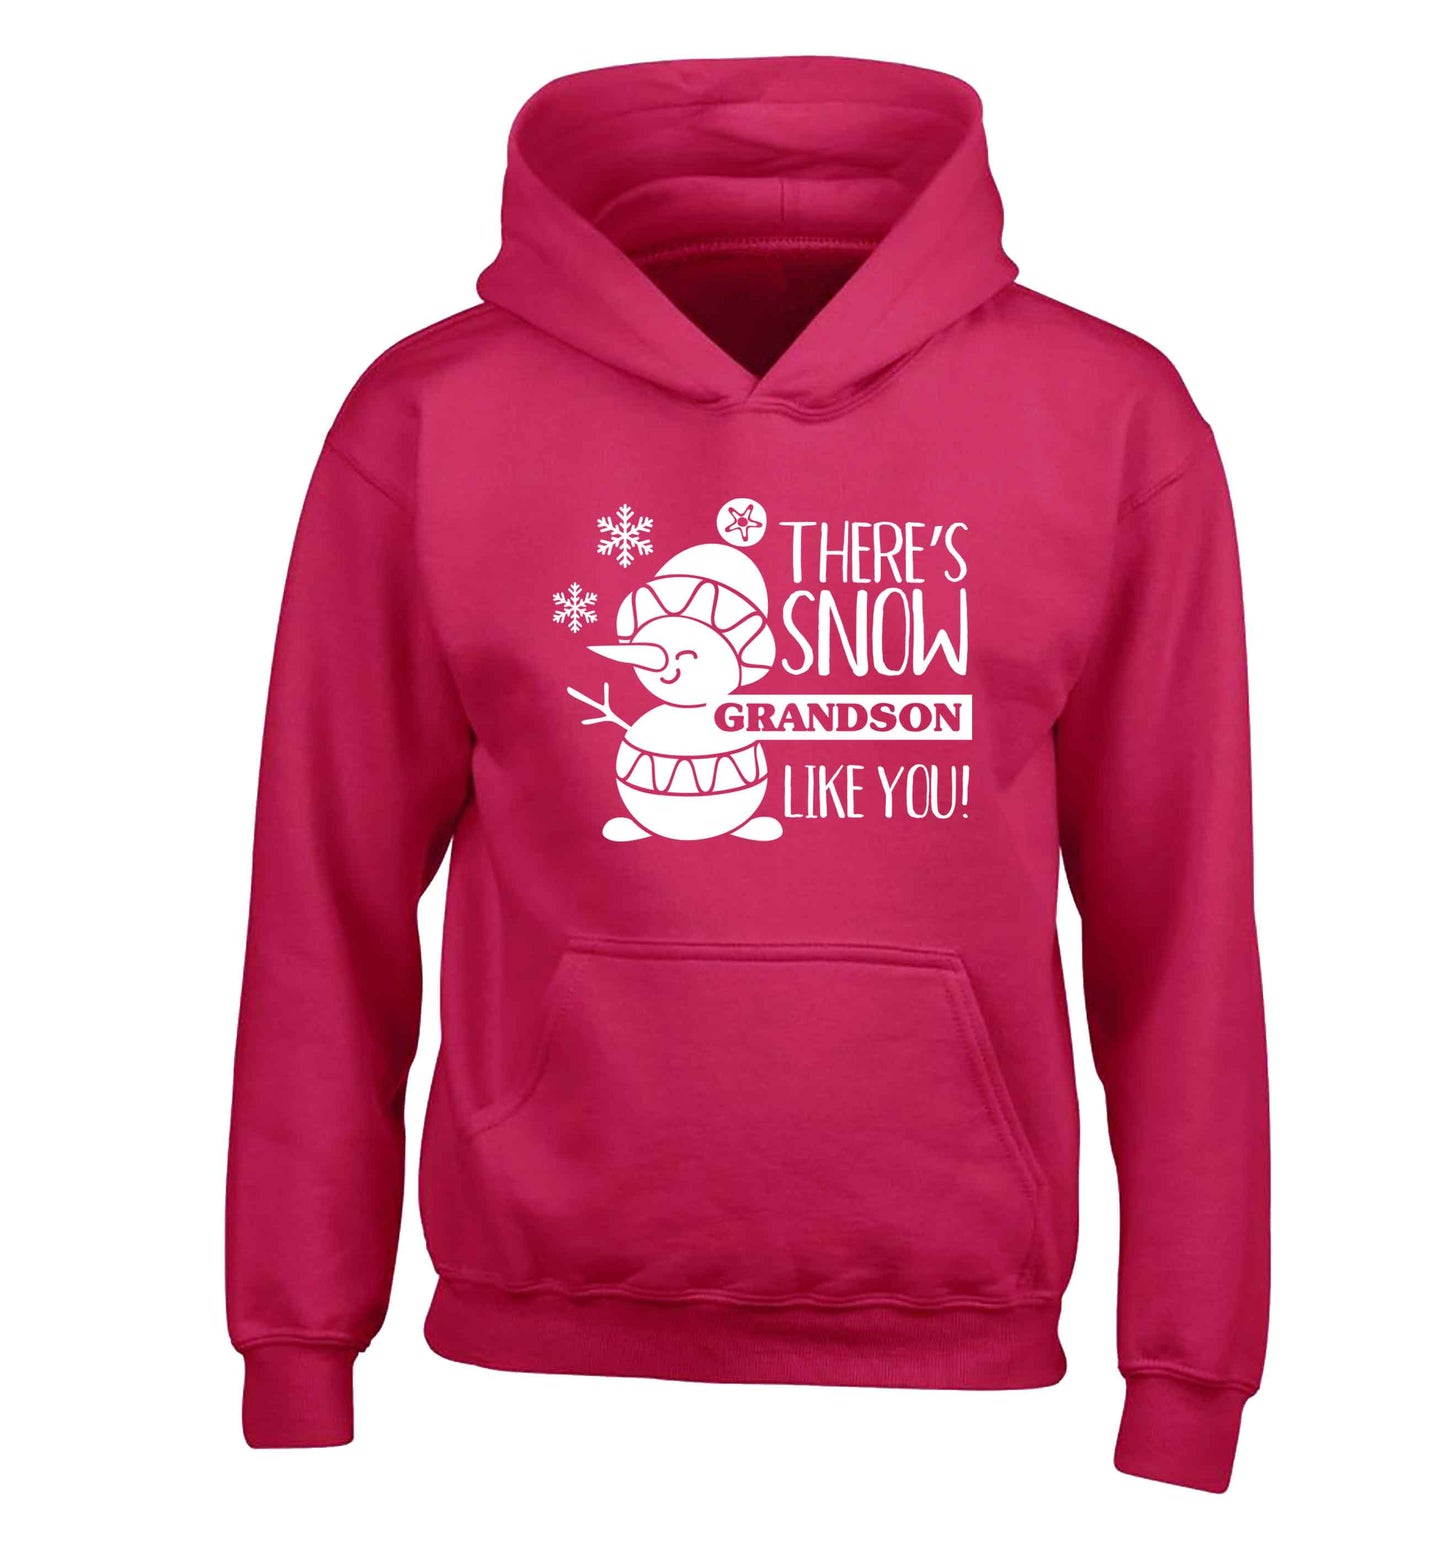 There's snow grandson like you children's pink hoodie 12-13 Years